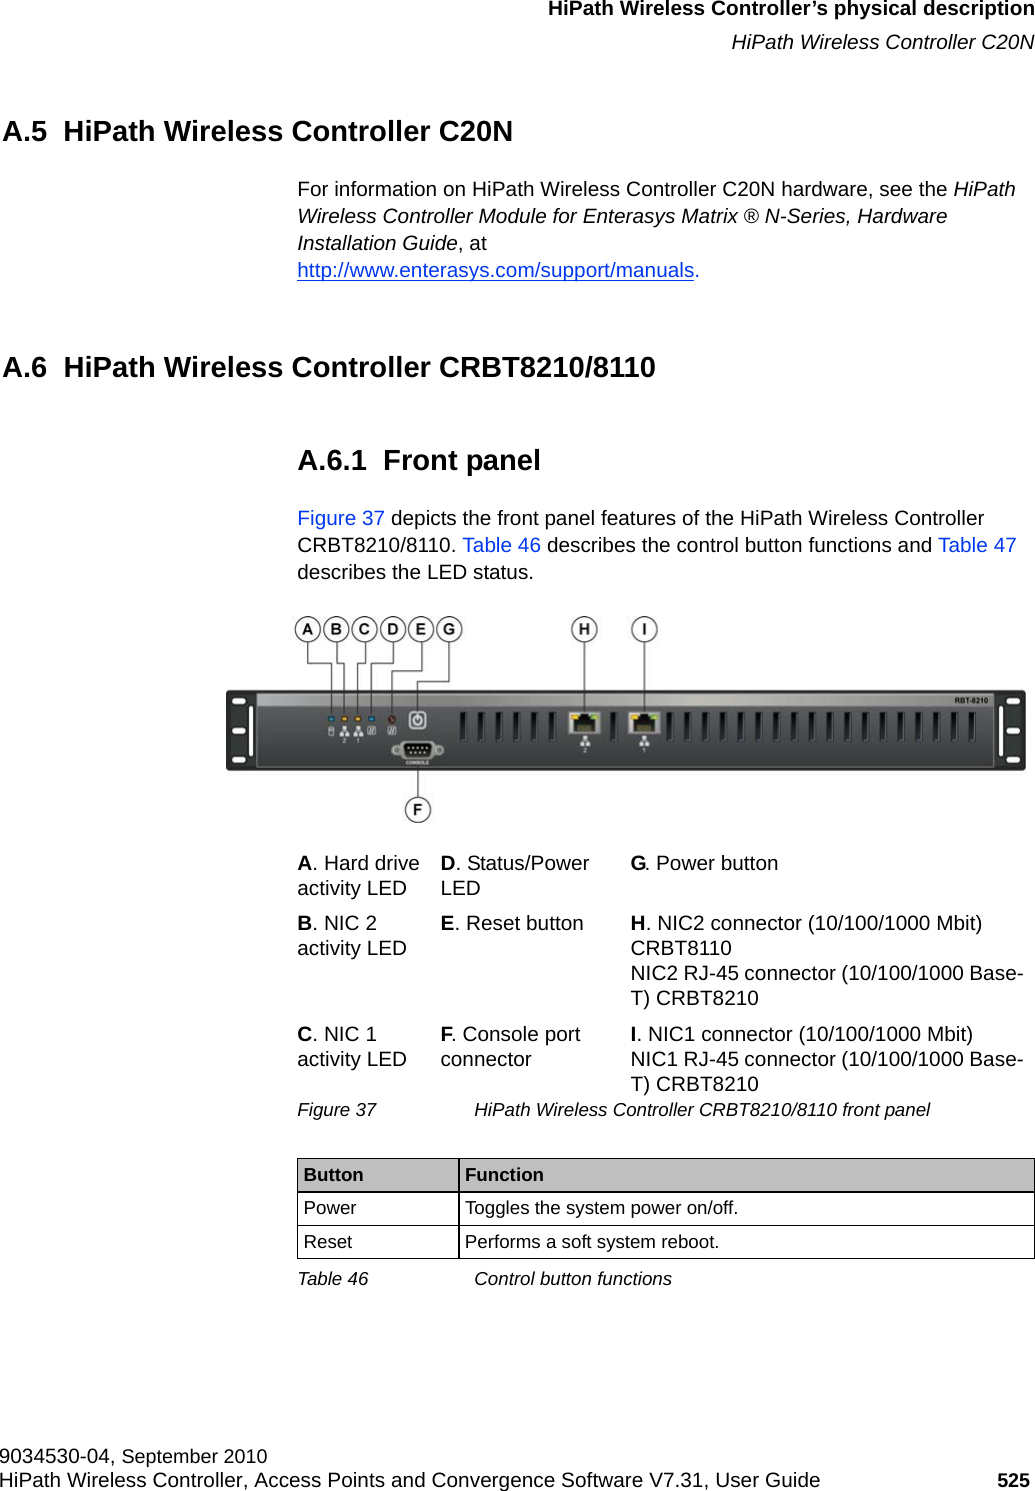 hwc_appendixa.fmHiPath Wireless Controller’s physical descriptionHiPath Wireless Controller C20N9034530-04, September 2010HiPath Wireless Controller, Access Points and Convergence Software V7.31, User Guide 525         A.5  HiPath Wireless Controller C20NFor information on HiPath Wireless Controller C20N hardware, see the HiPath Wireless Controller Module for Enterasys Matrix ® N-Series, Hardware Installation Guide, at http://www.enterasys.com/support/manuals.A.6  HiPath Wireless Controller CRBT8210/8110A.6.1  Front panelFigure 37 depicts the front panel features of the HiPath Wireless Controller CRBT8210/8110. Table 46 describes the control button functions and Table 47 describes the LED status.Figure 37 HiPath Wireless Controller CRBT8210/8110 front panel A. Hard drive activity LED D. Status/Power LED G. Power buttonB. NIC 2 activity LED E. Reset button H. NIC2 connector (10/100/1000 Mbit) CRBT8110NIC2 RJ-45 connector (10/100/1000 Base-T) CRBT8210C. NIC 1 activity LED F. Console port connector I. NIC1 connector (10/100/1000 Mbit)NIC1 RJ-45 connector (10/100/1000 Base-T) CRBT8210Button FunctionPower Toggles the system power on/off.Reset Performs a soft system reboot.Table 46 Control button functions